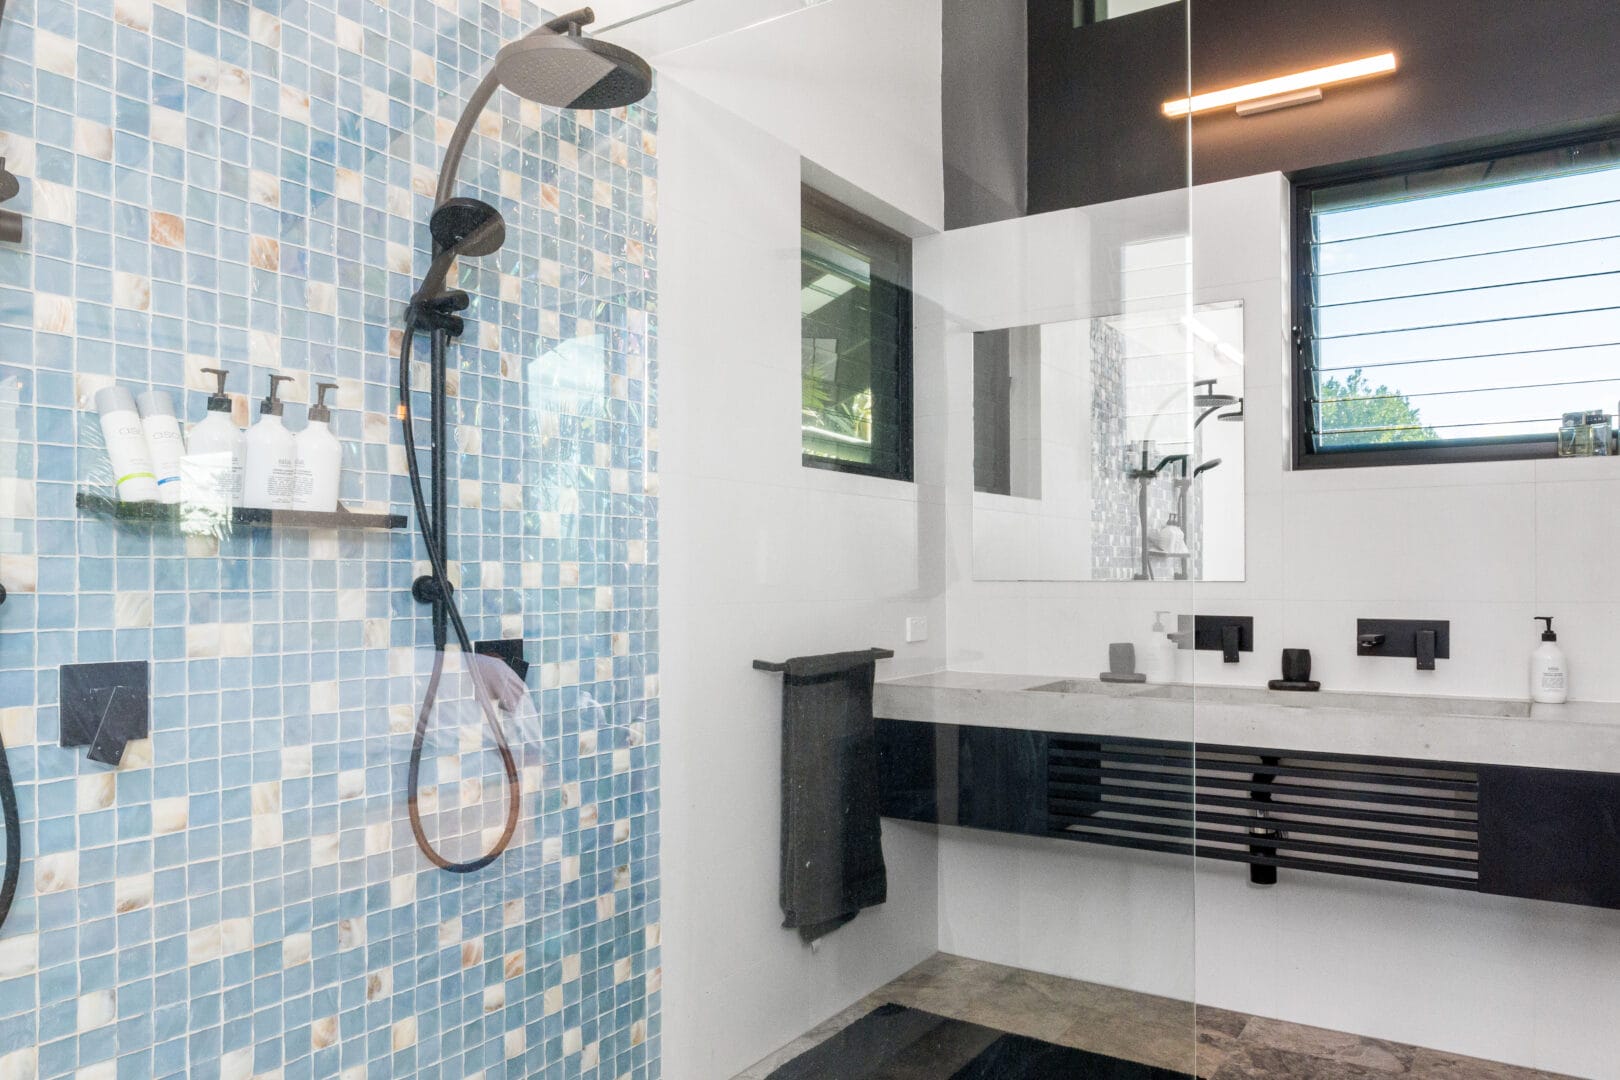 Shower stall with pretty blue tiles